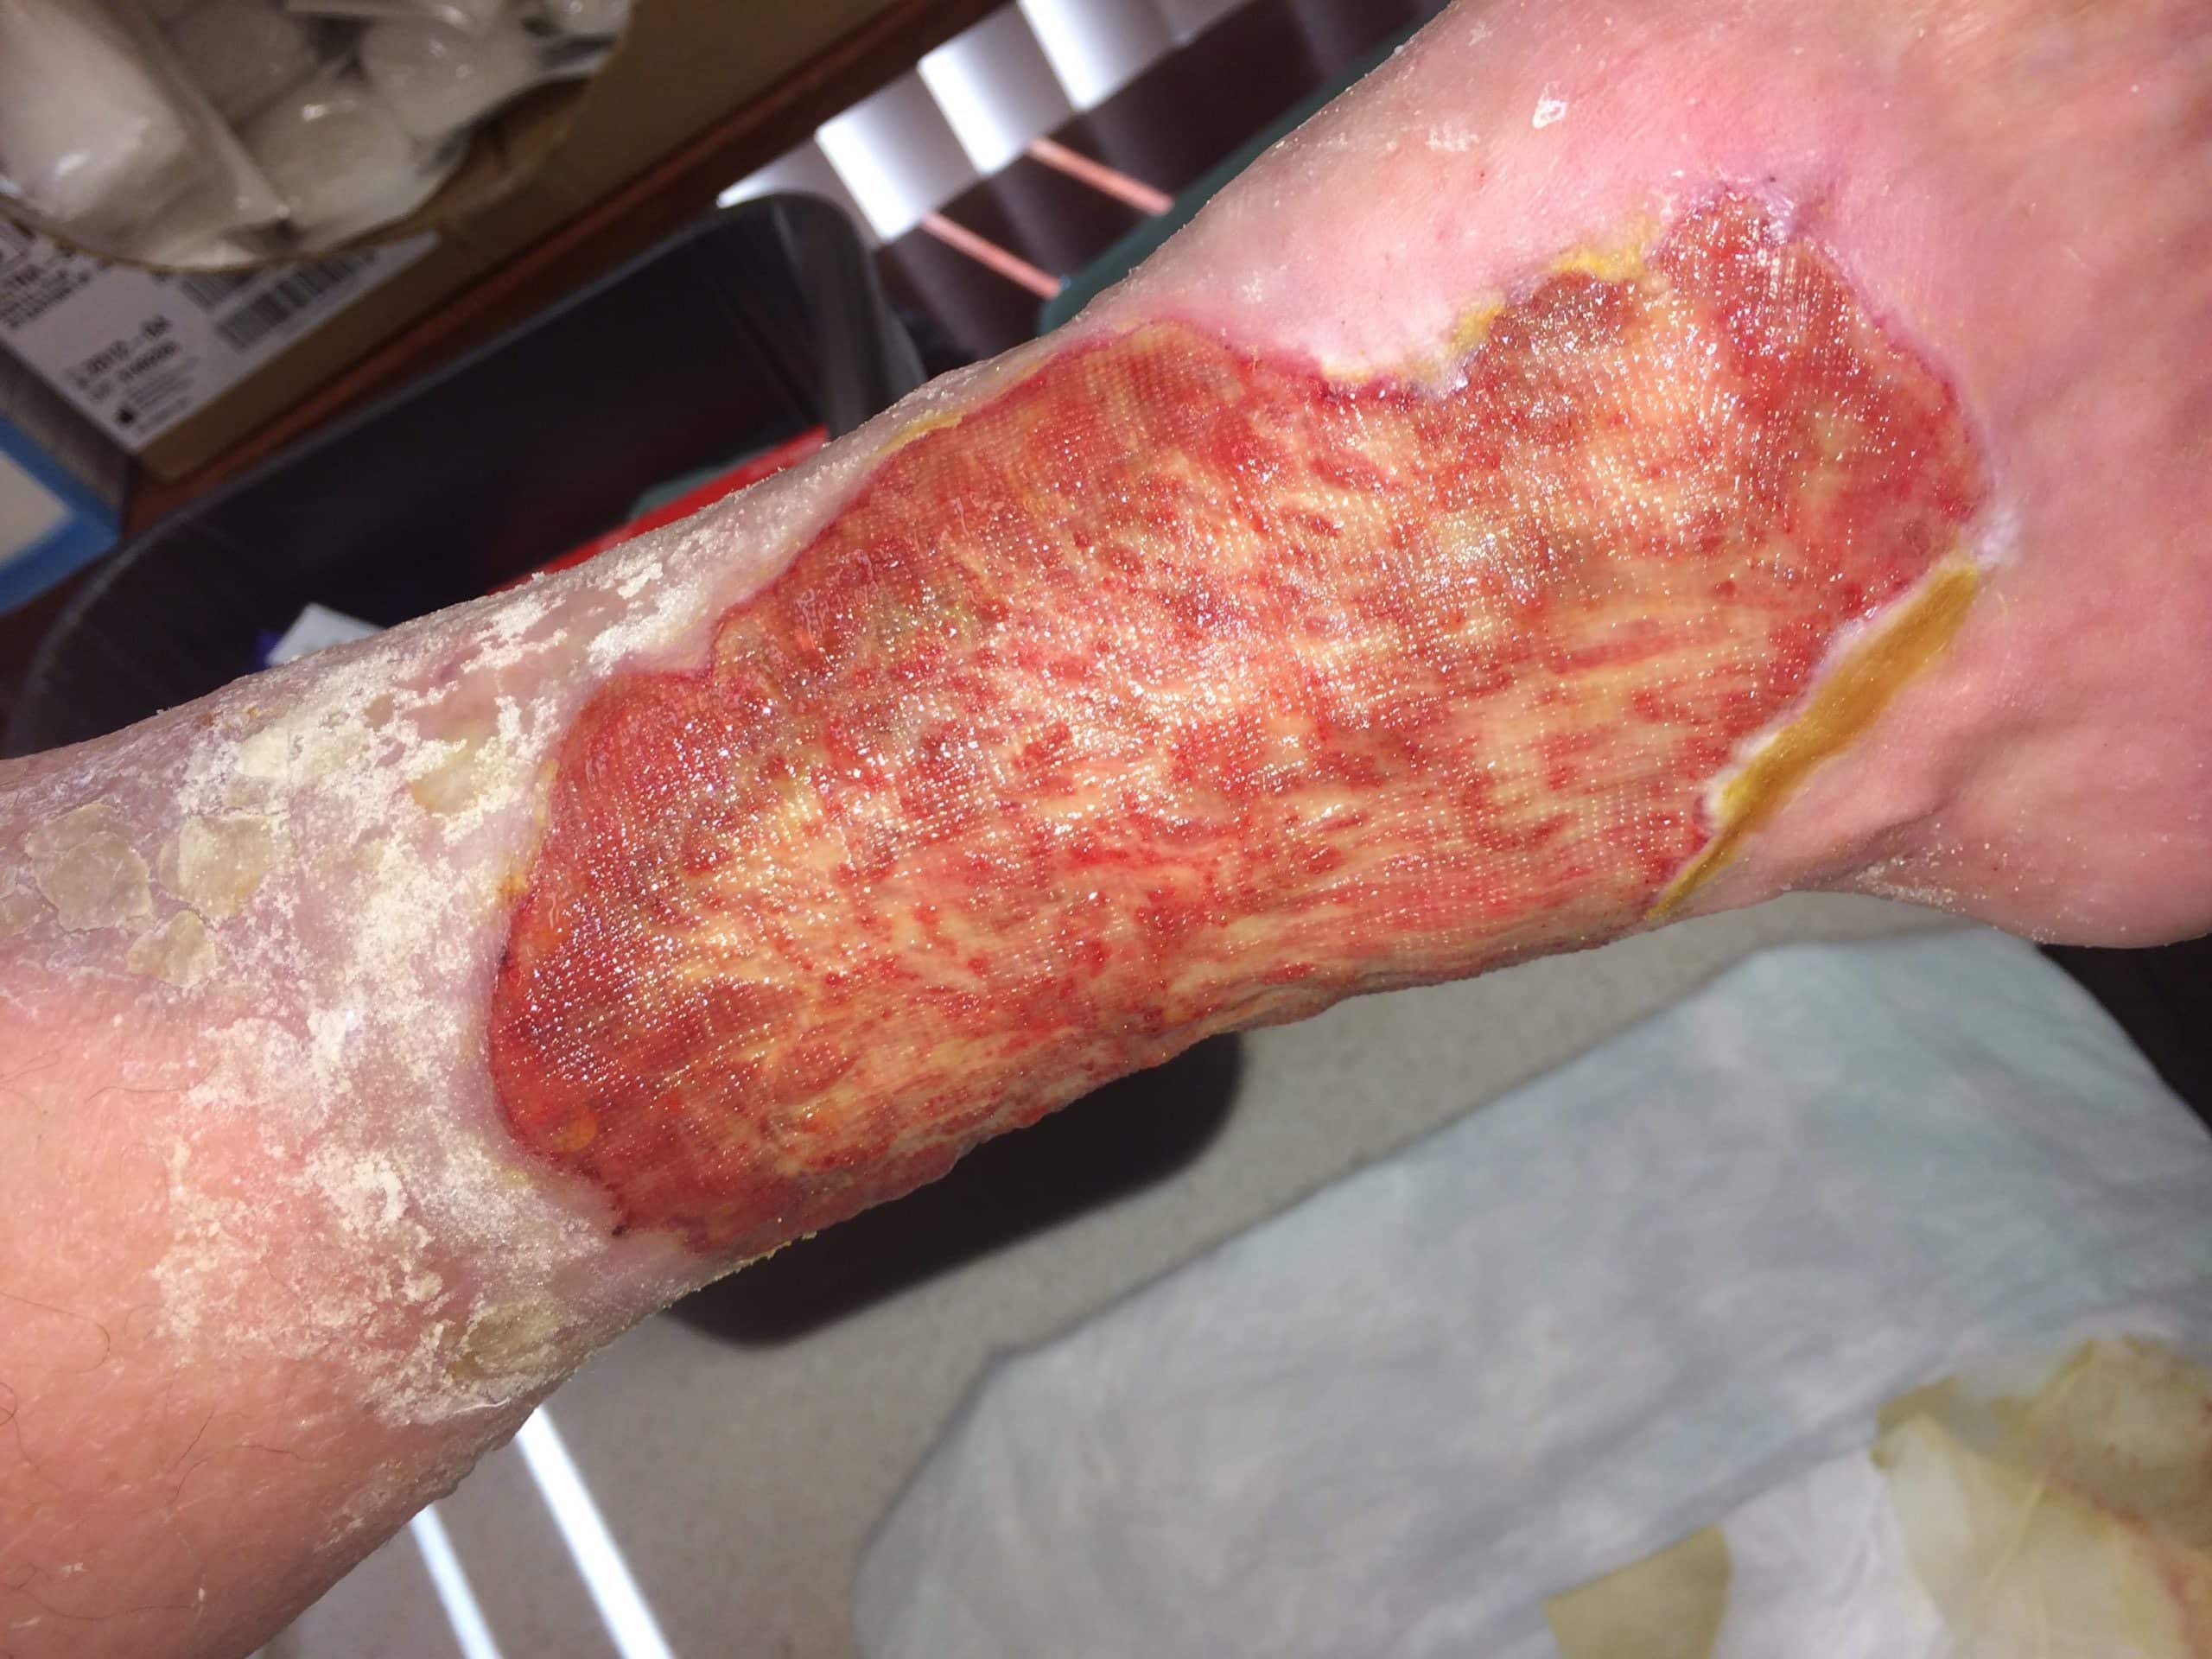 A venous leg ulcer showing early signs of healing.